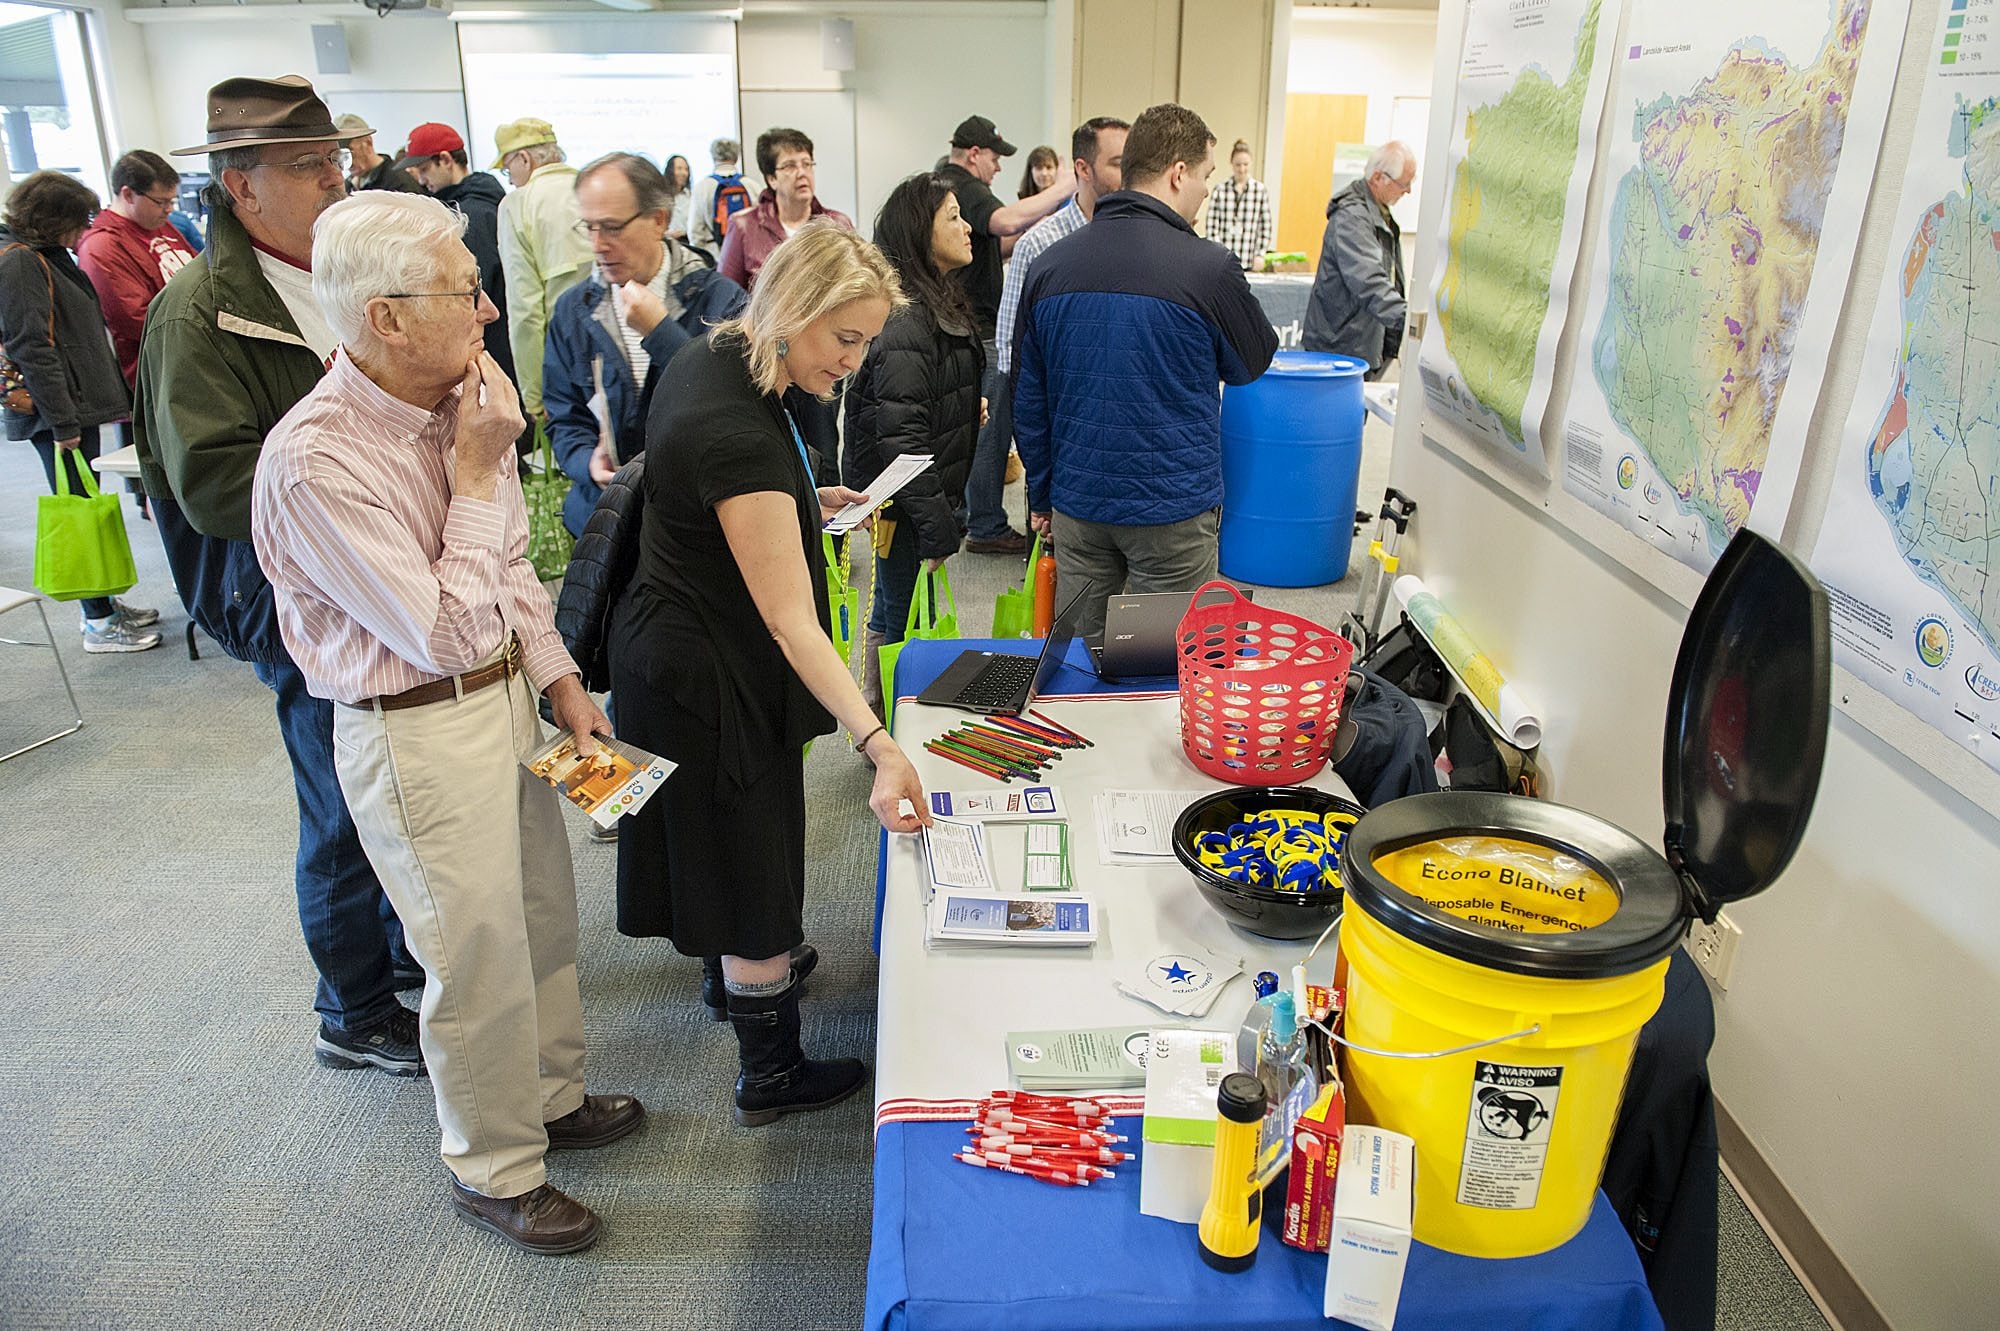 A crowd inspects emergency disaster kits Thursday at the Washington State University Vancouver campus.